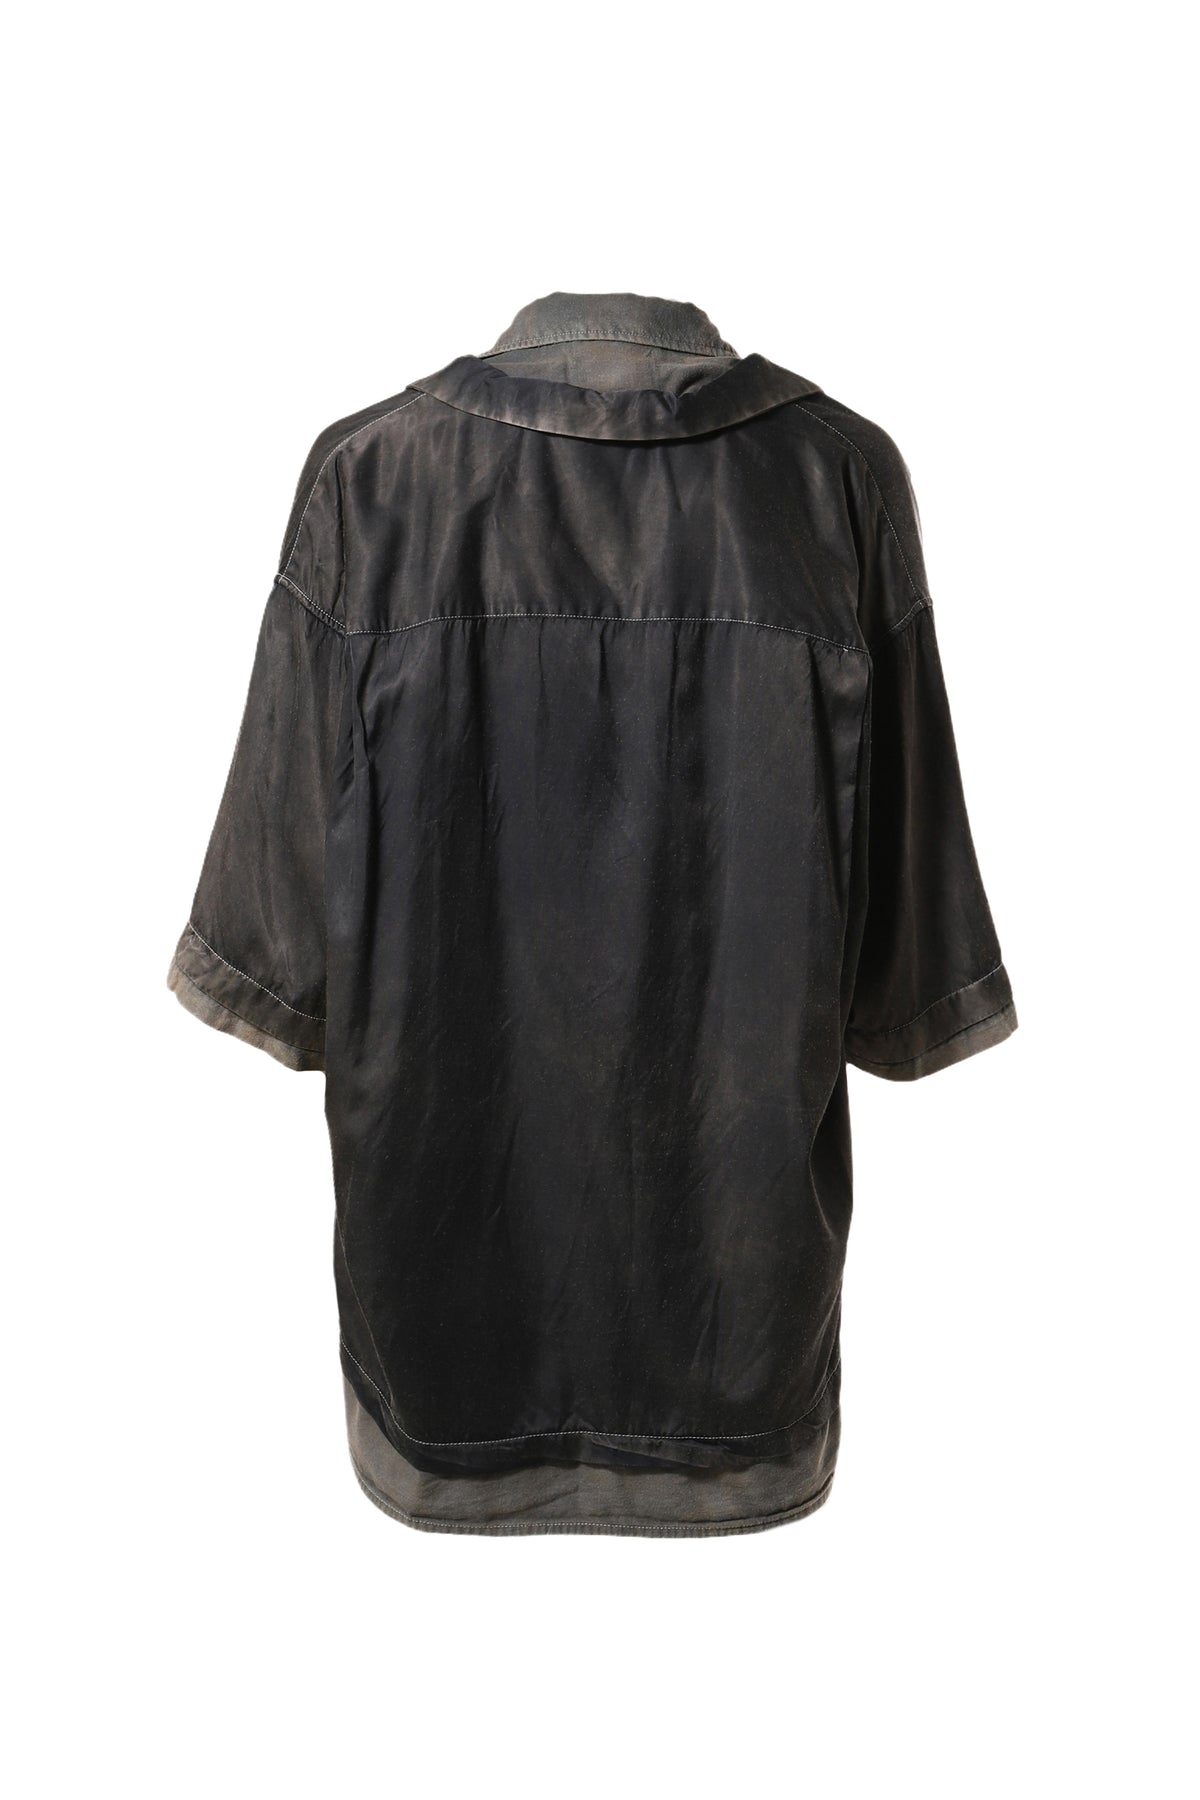 RC TWILL DOUBLE LAYERED S/S SHIRTS / BLK